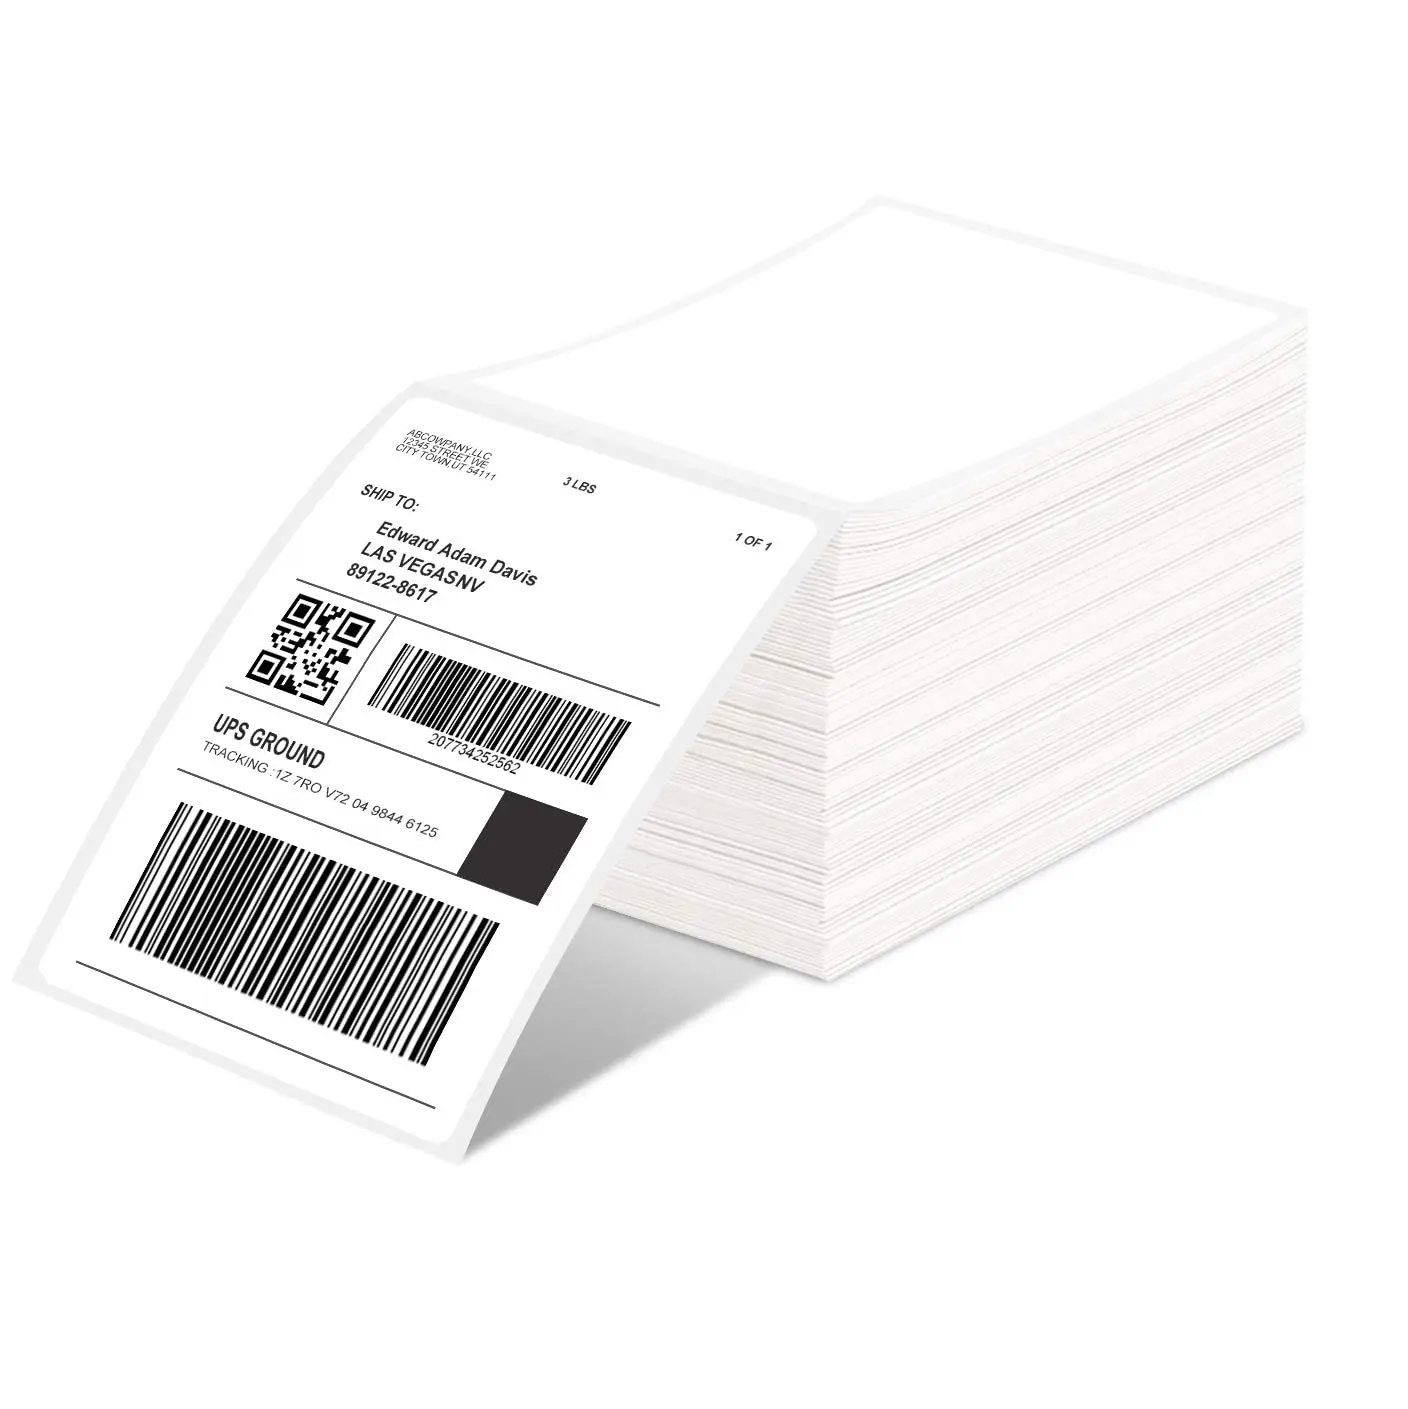 

500 Sheets Phomemo Thermal Label Sticker 100x150mm Shipping Labels for Postage Barcode Compatible with PM241 PM246S Printer